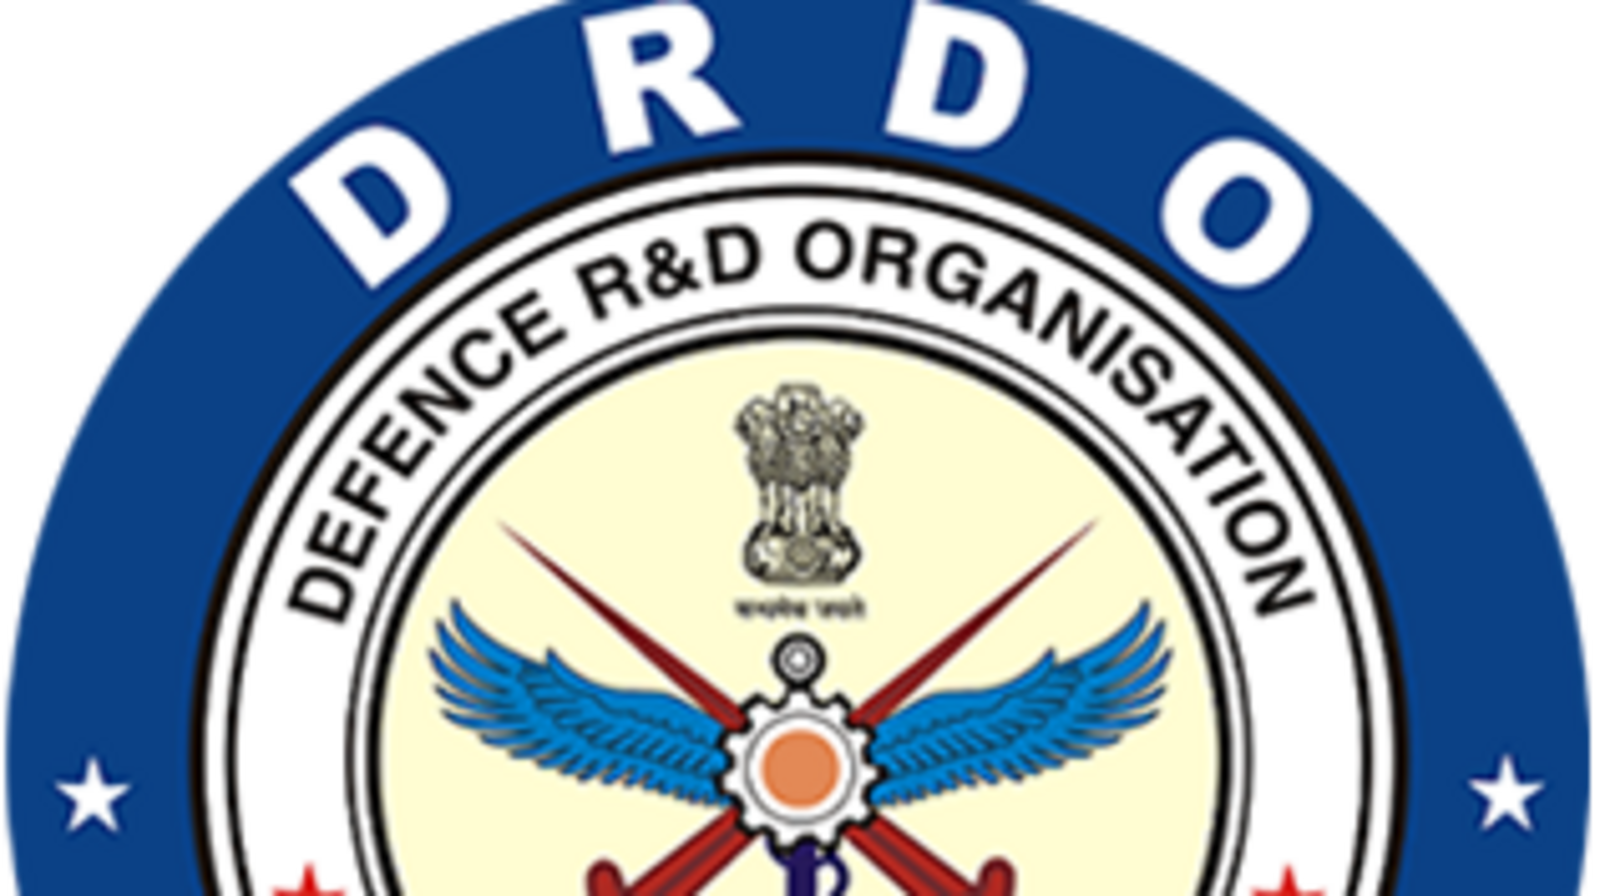 DRDO CEPTAM Recruitment: Last date to apply for 1061 A&A posts on drdo.gov.in